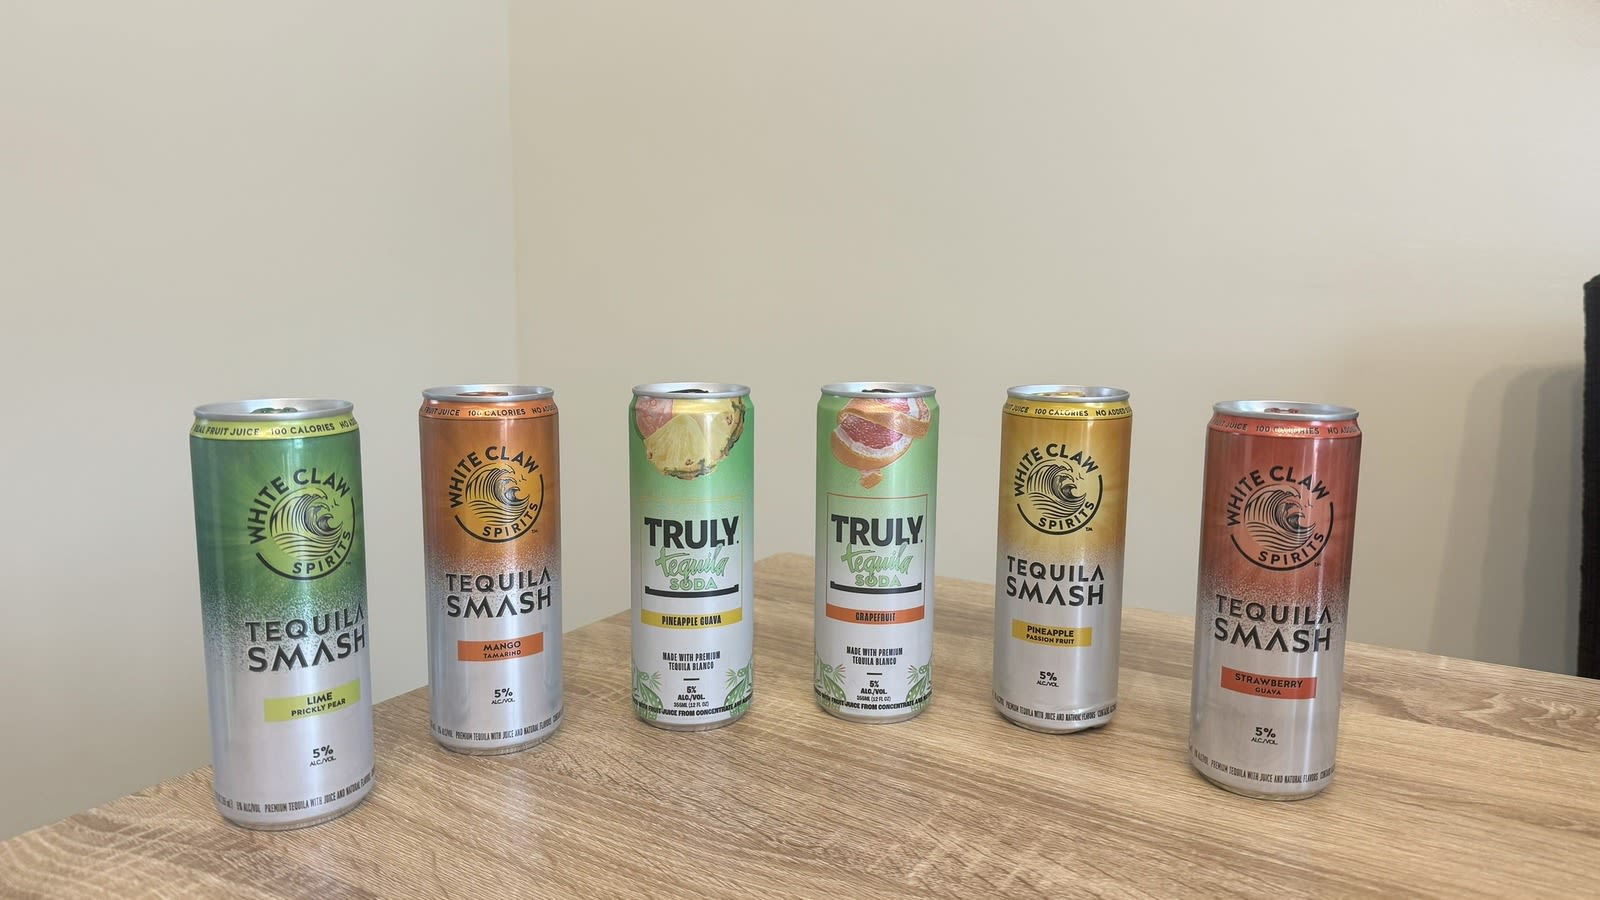 White Claw Tequila Smash Vs Truly Lime Tequila Soda: Which Canned Cocktail Is Best?